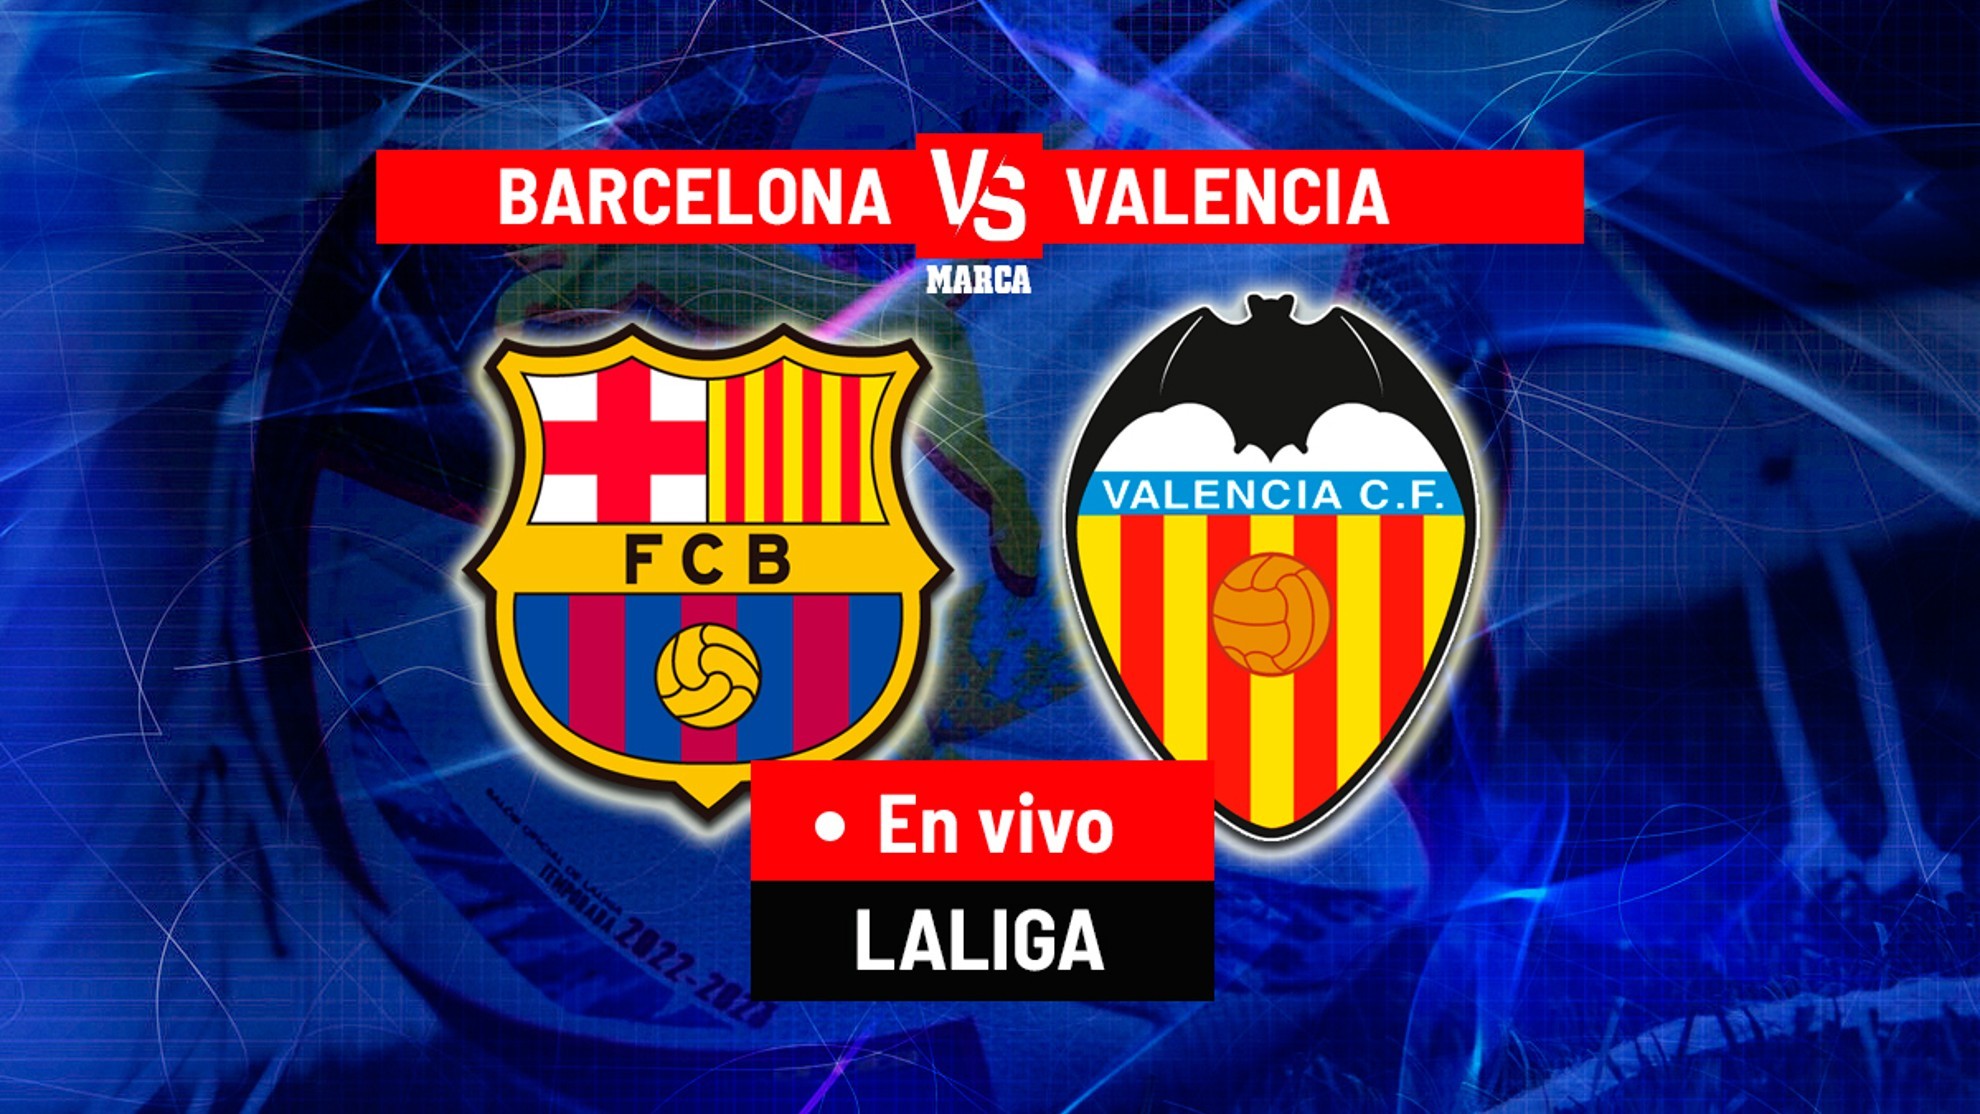 Barcelona add three points by beating Valencia 1-0 with 10 men on the field